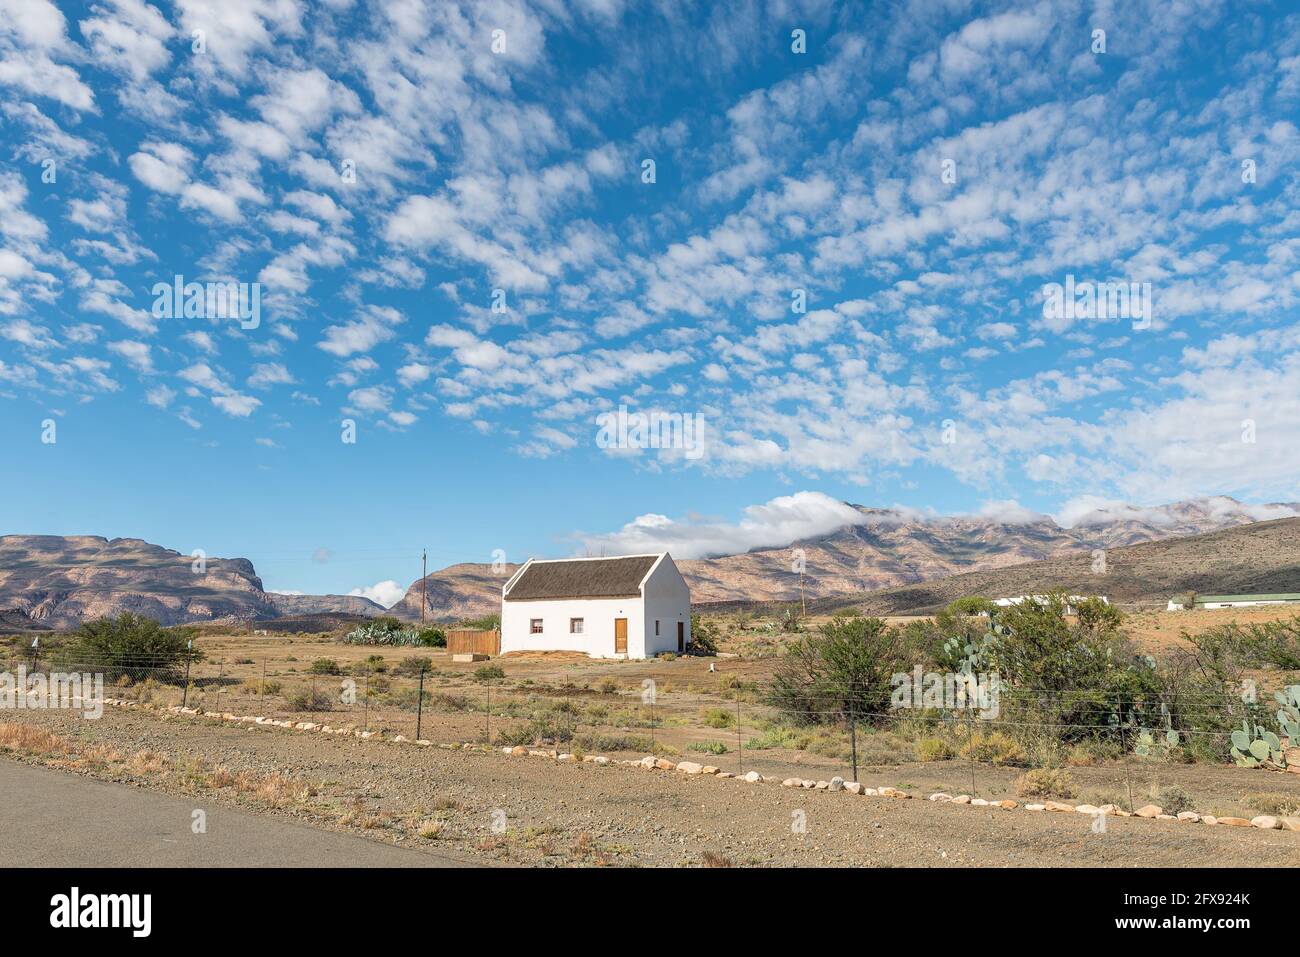 KLAARSTROOM, SOUTH AFRICA - APRIL 5, 2021: A house in Klaarstroom in the Western Cape Karoo. Meiringspoort is visible to the left as a break in the Sw Stock Photo